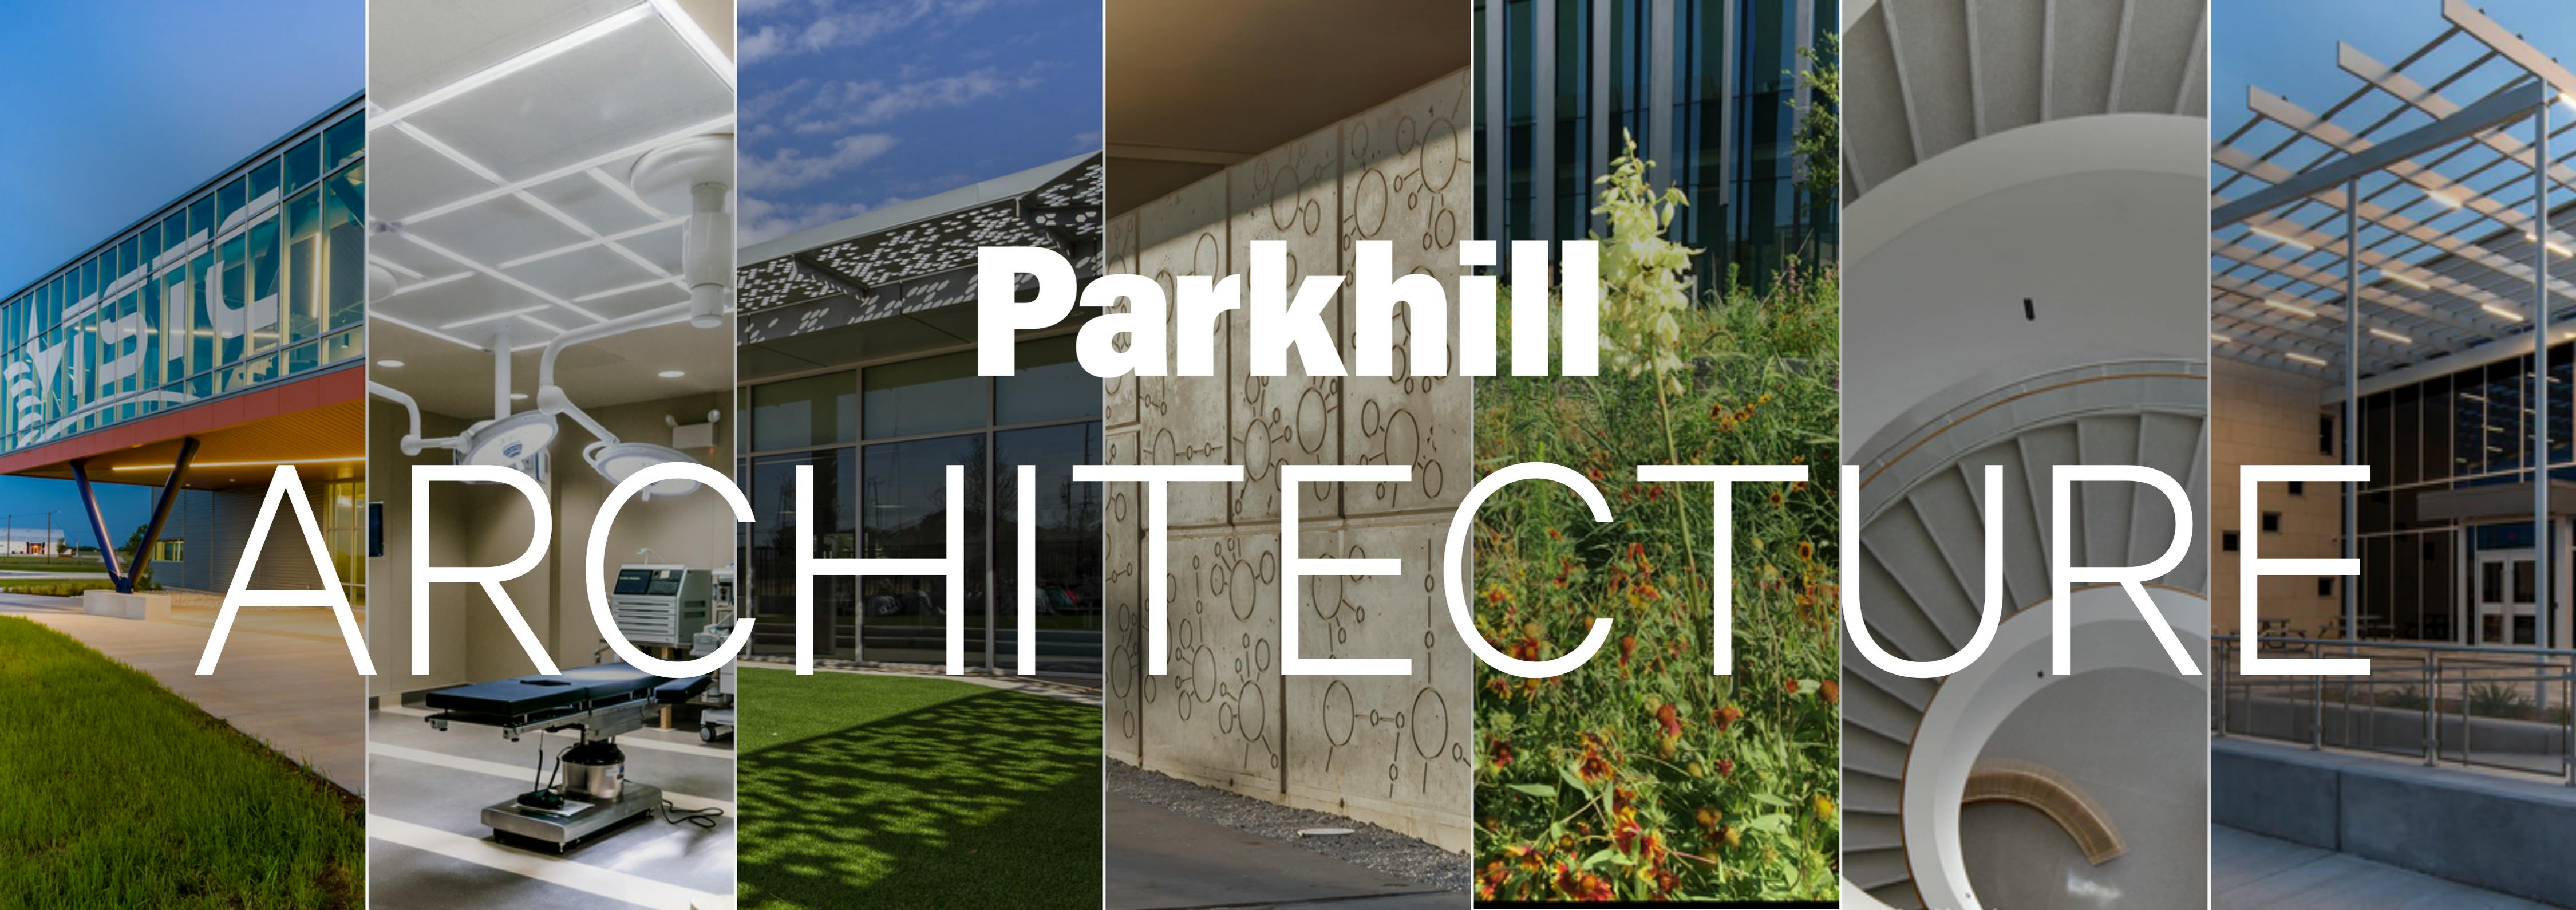 Architect Brandon Young Elected as Parkhill's First Design Director cover image